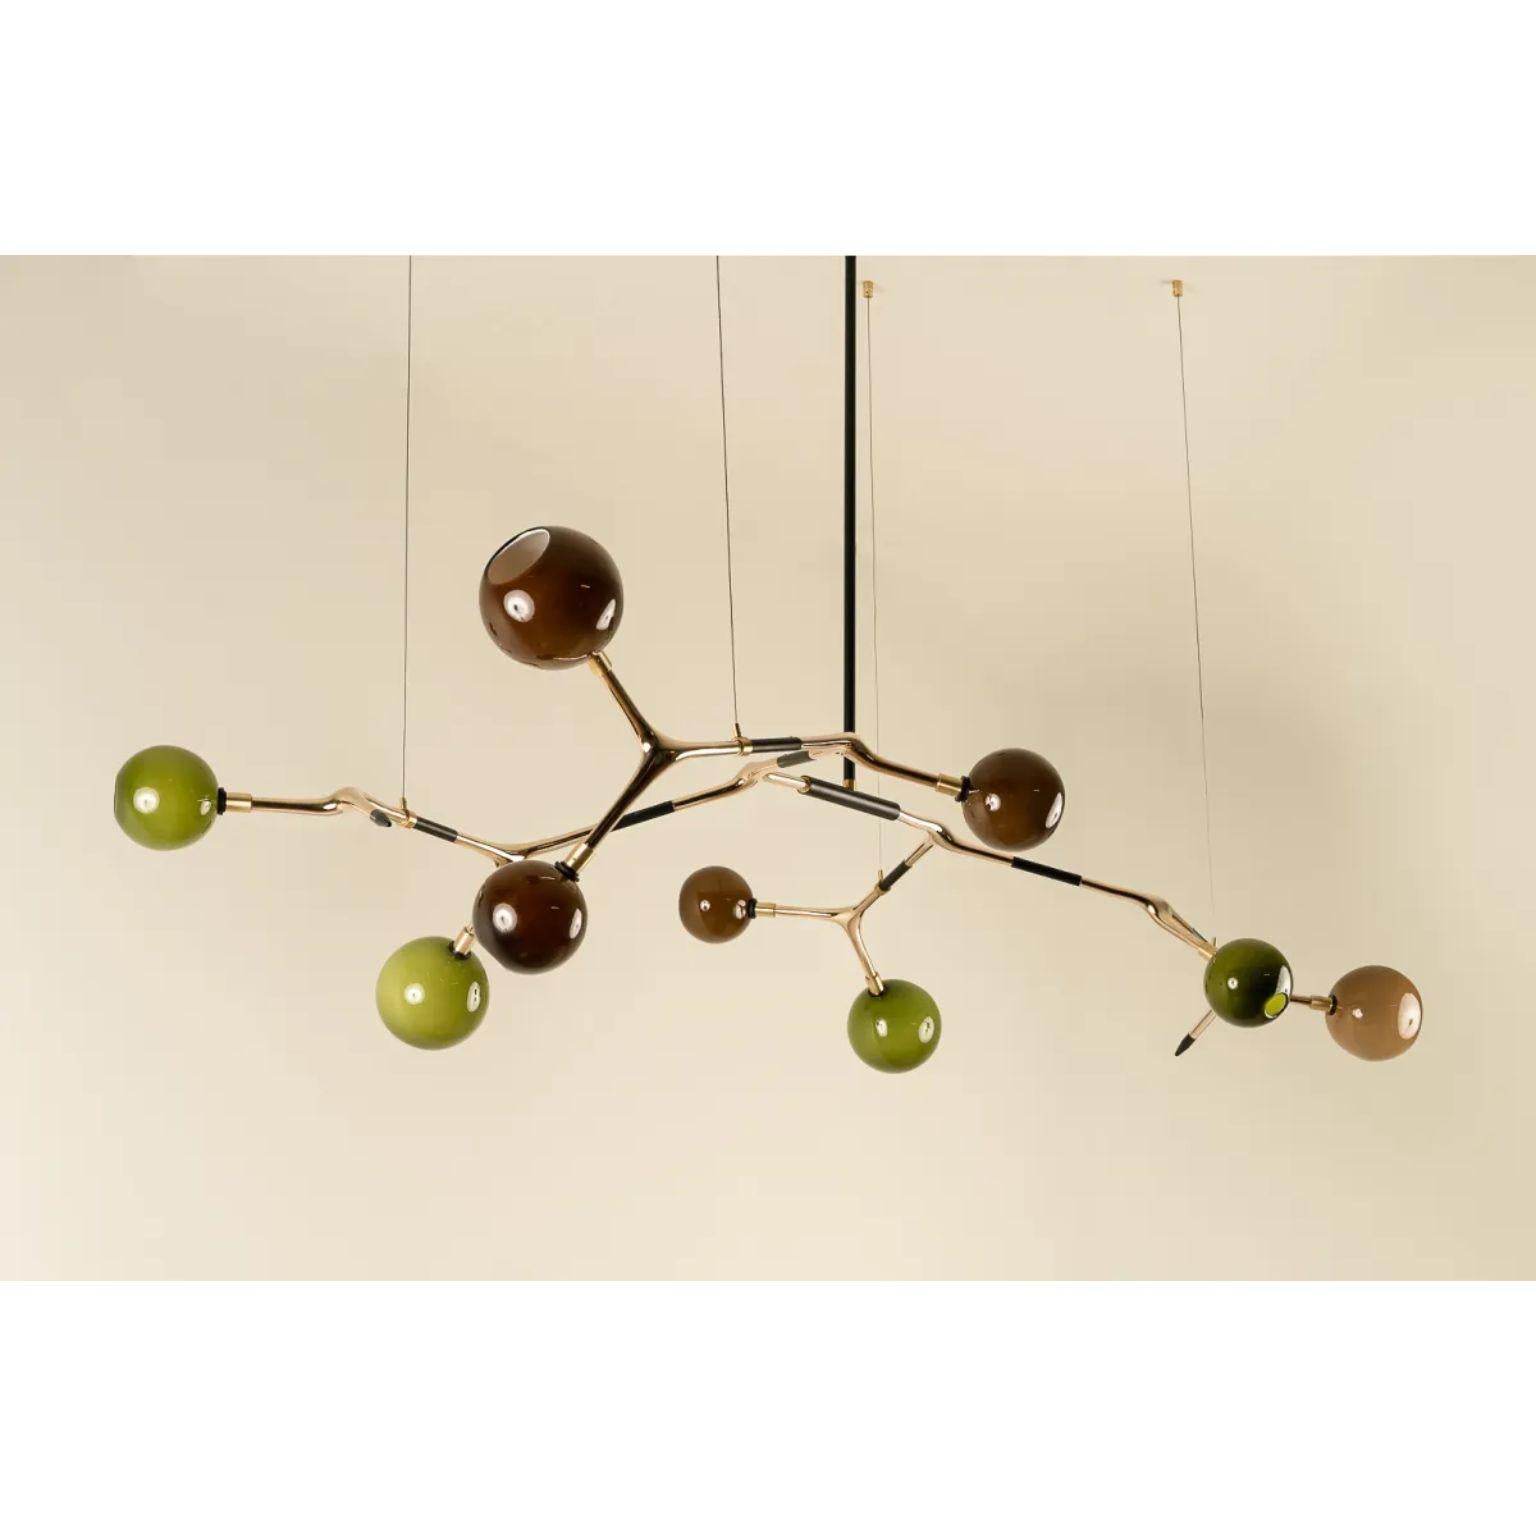 Coffee and Olive with Polished Bronze Mantis 9 Pendant Lamp by Isabel Moncada
Dimensions: D 100 x W 190 x H 110 cm.
Materials: Cast bronze, blown glass and turned brass.

Mantis 9, discreet and elegant with measured dimensions. For a medium and